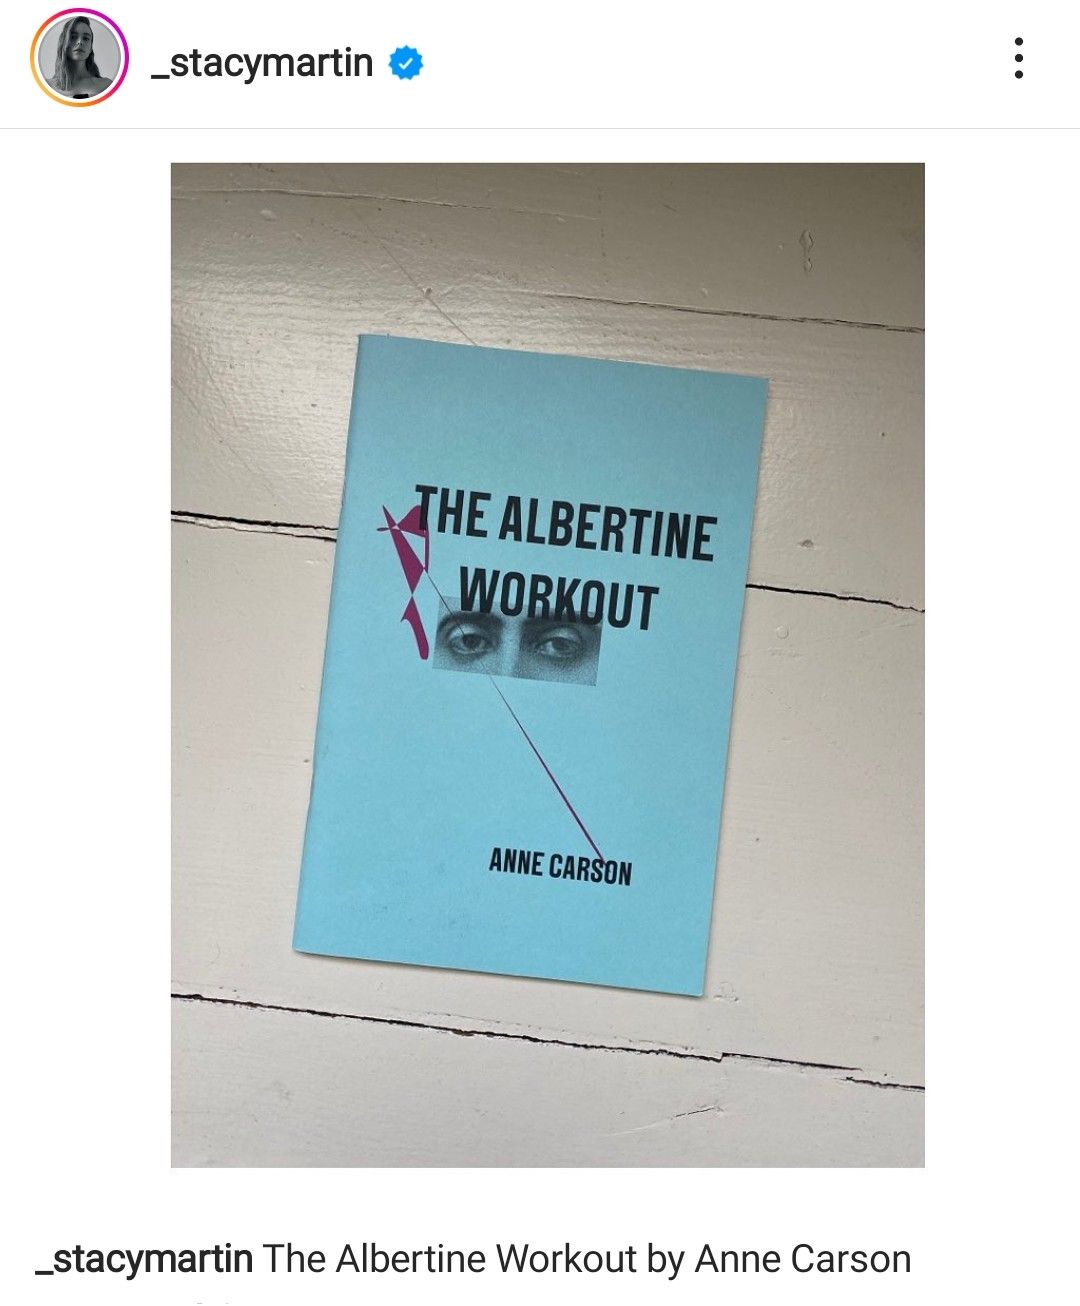 Stacy Martin on Instagram : The Albertine Workout by Anne Carson / Marcel Proust